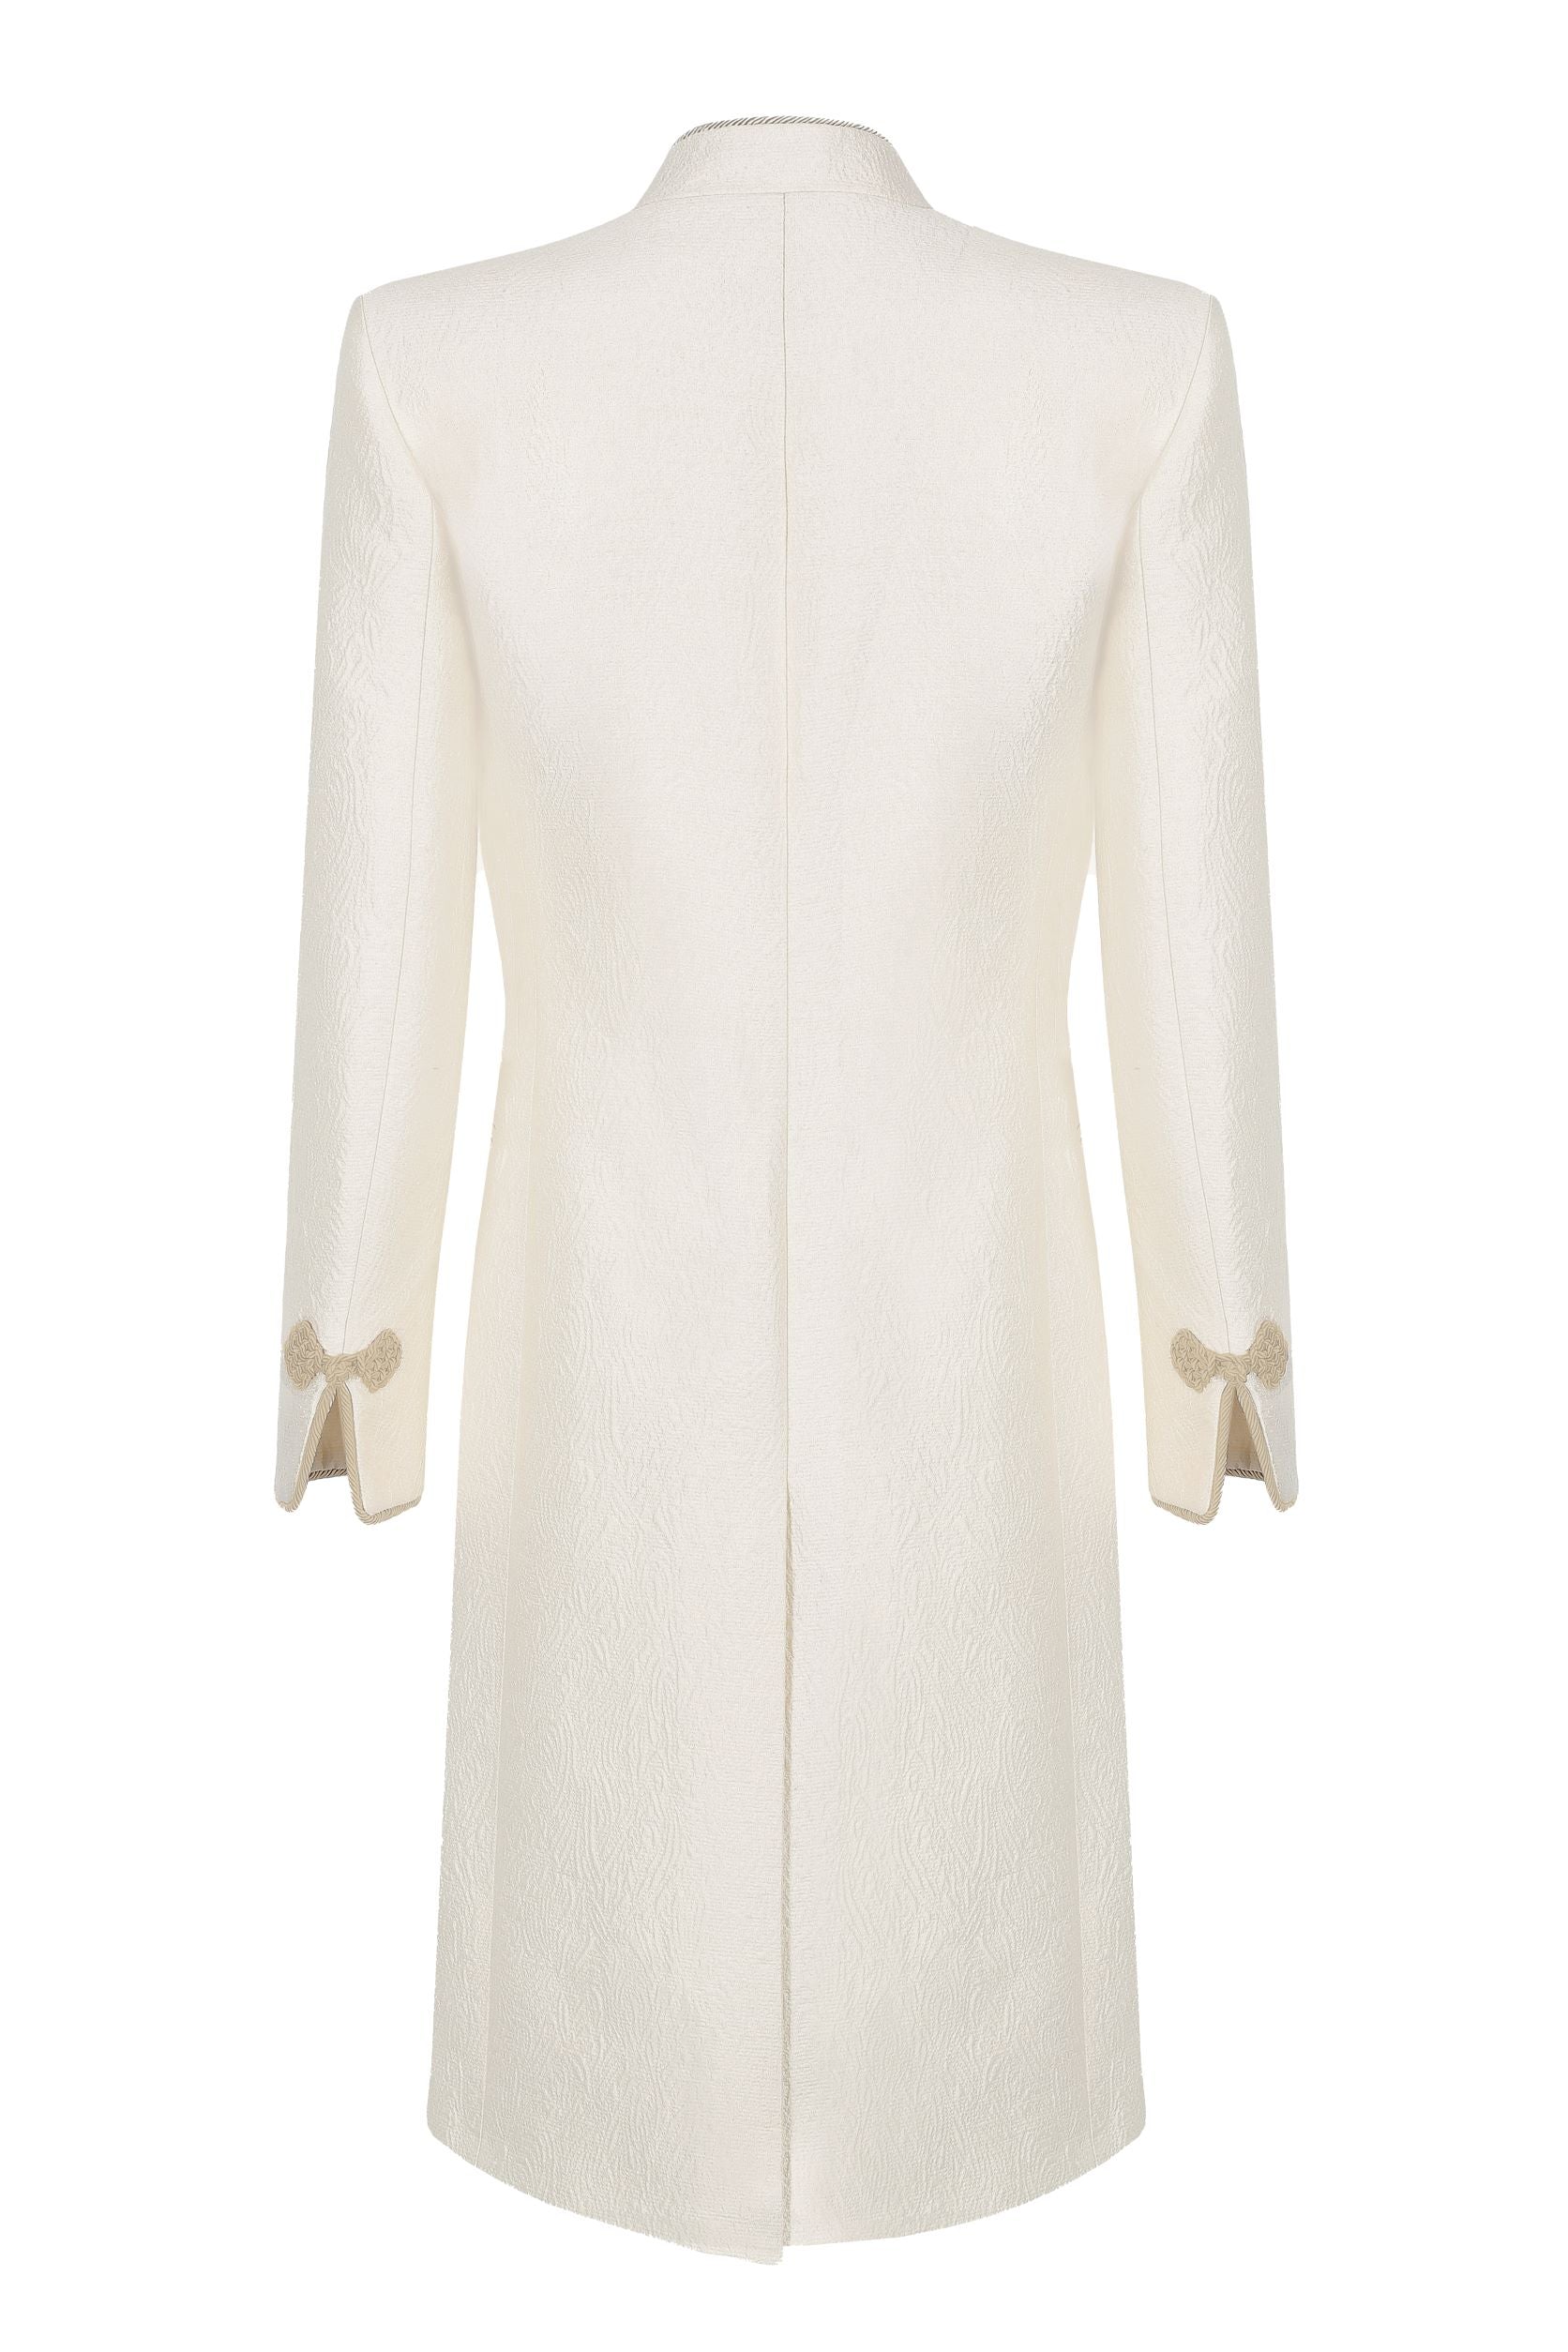 Ivory Dress Coat in Summer Brocade with Cord Trim and Frogging - Vicky